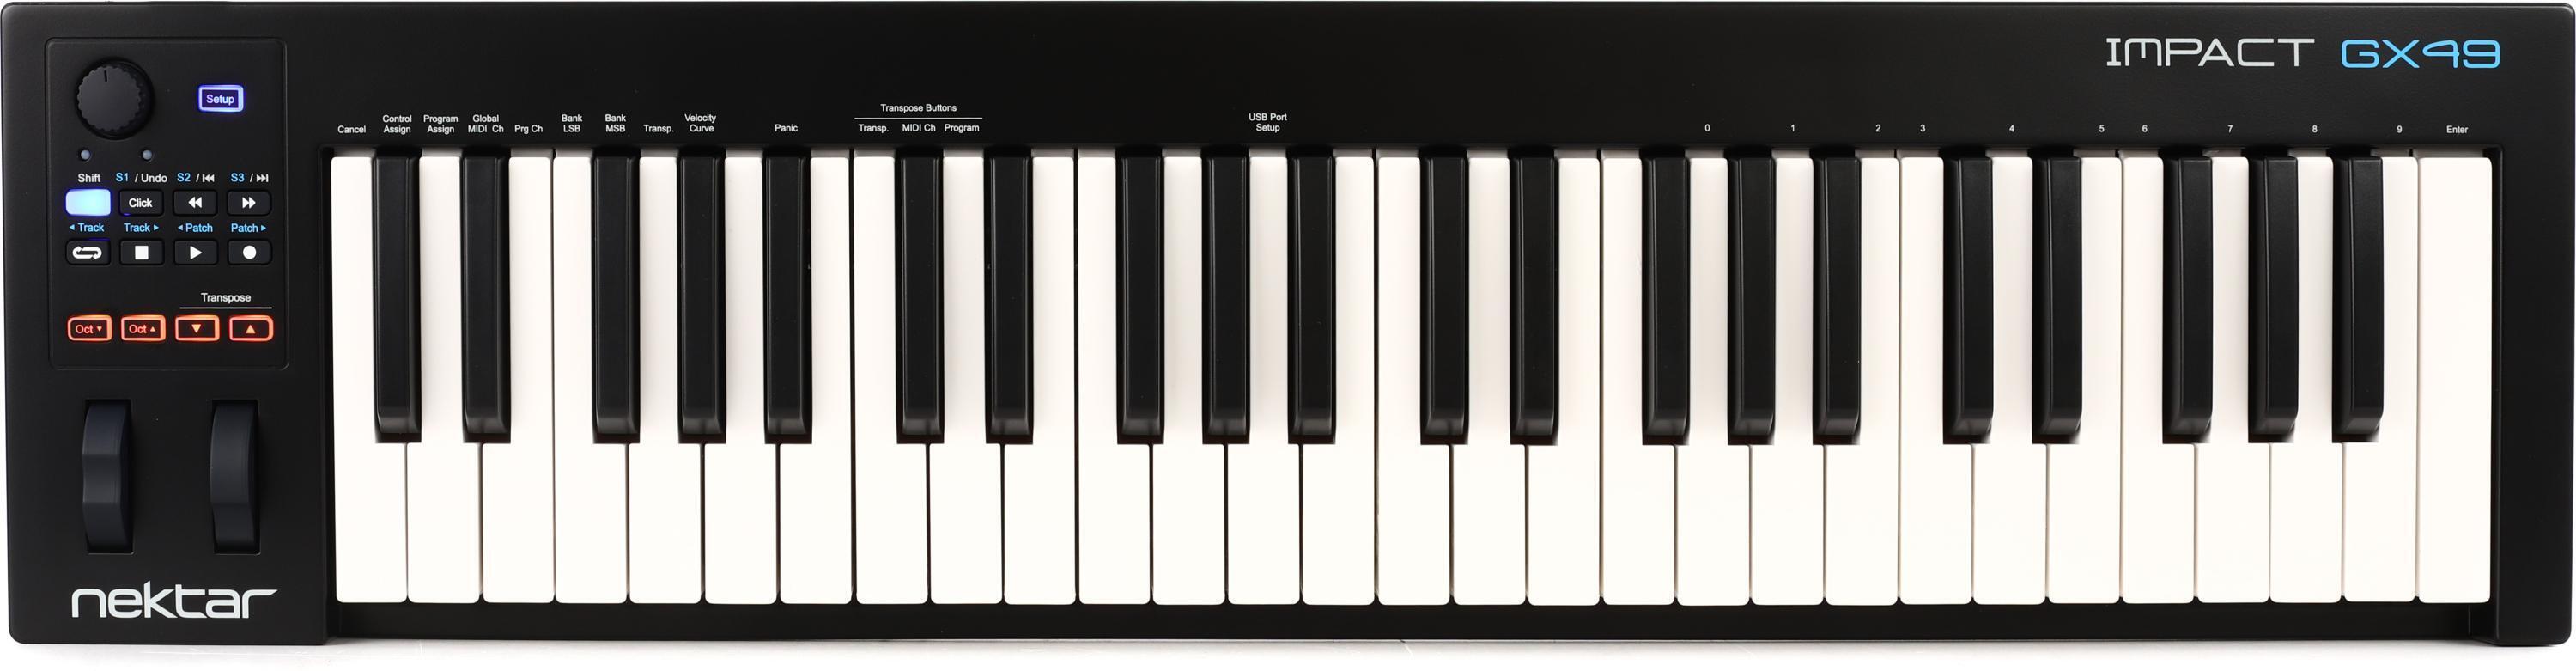 Roland A-49 49-key Keyboard Controller - Black | Sweetwater